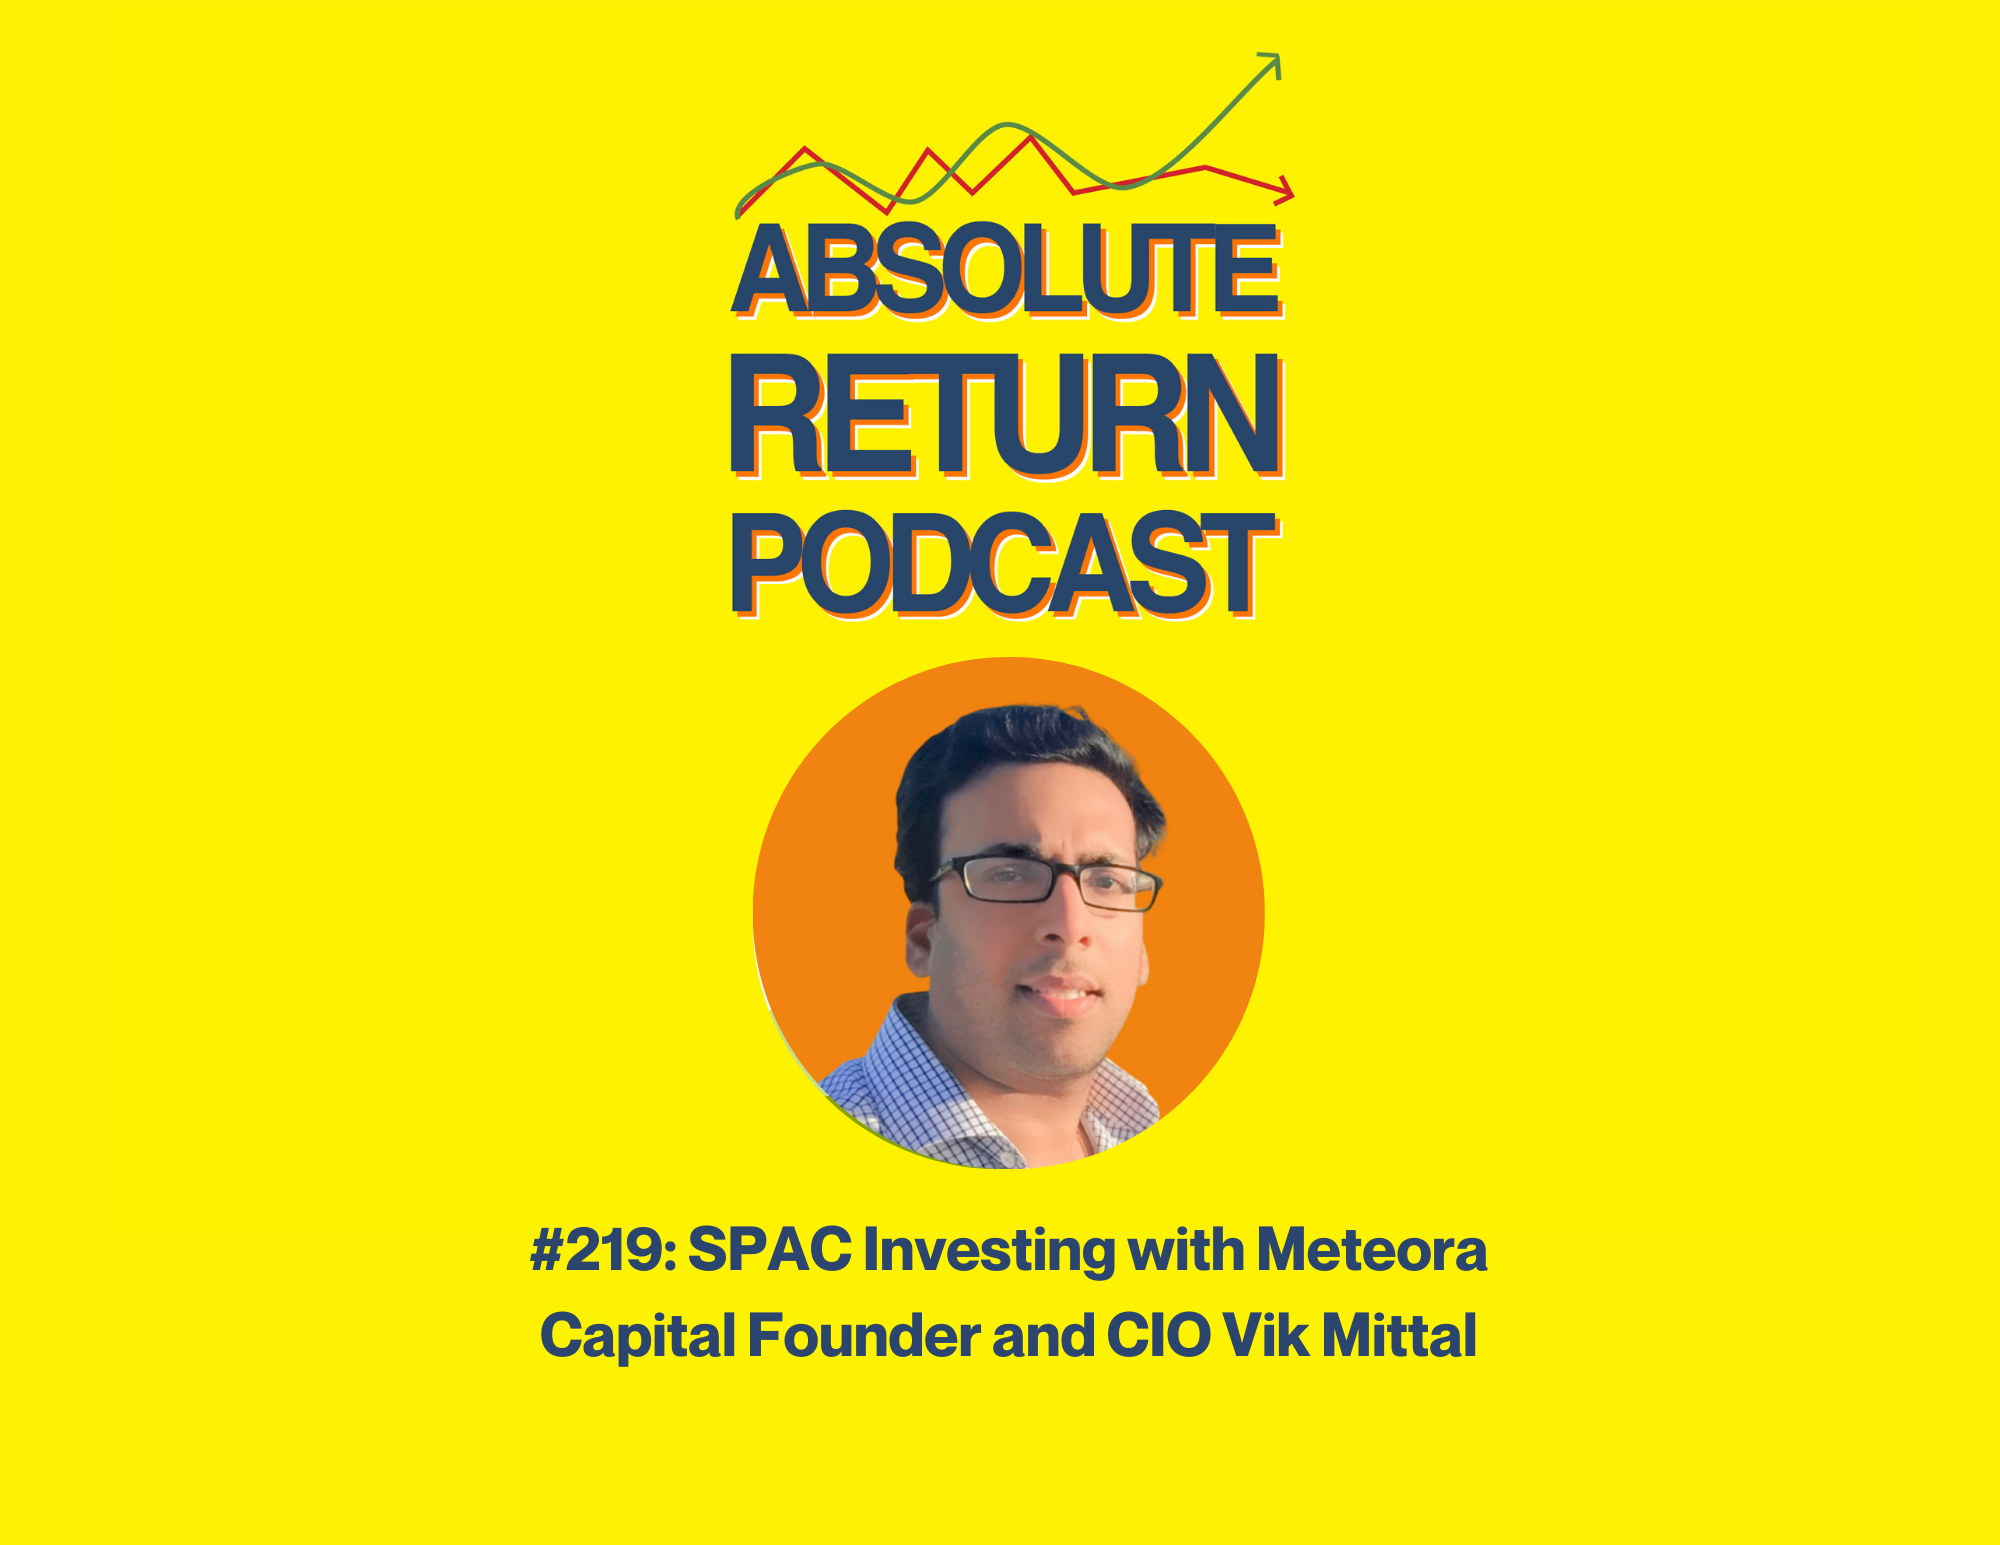 Absolute Return Podcast #219: SPAC Investing with Meteora Capital Founder and CIO Vik Mittal